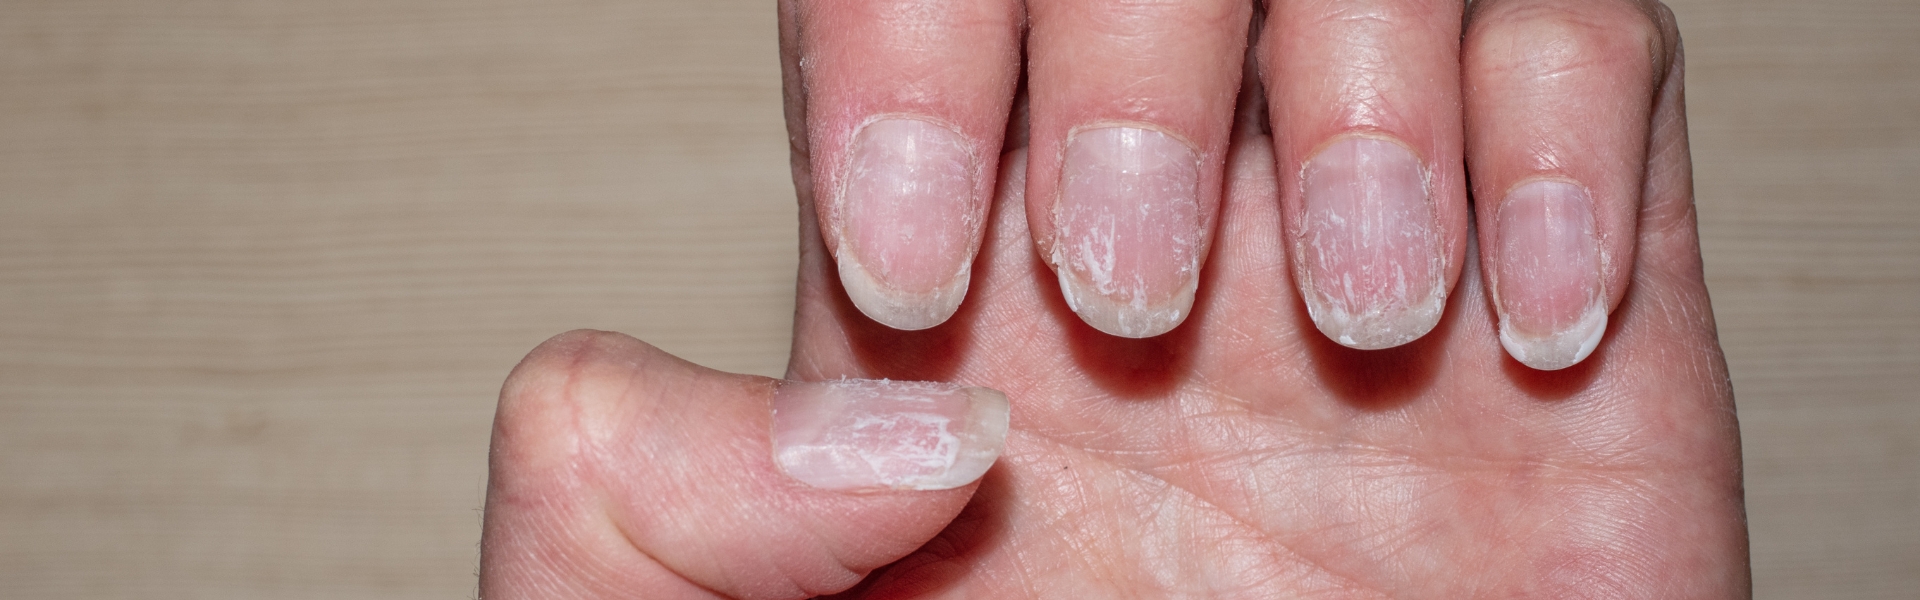 best homeopathy treatment for Brittle Nails